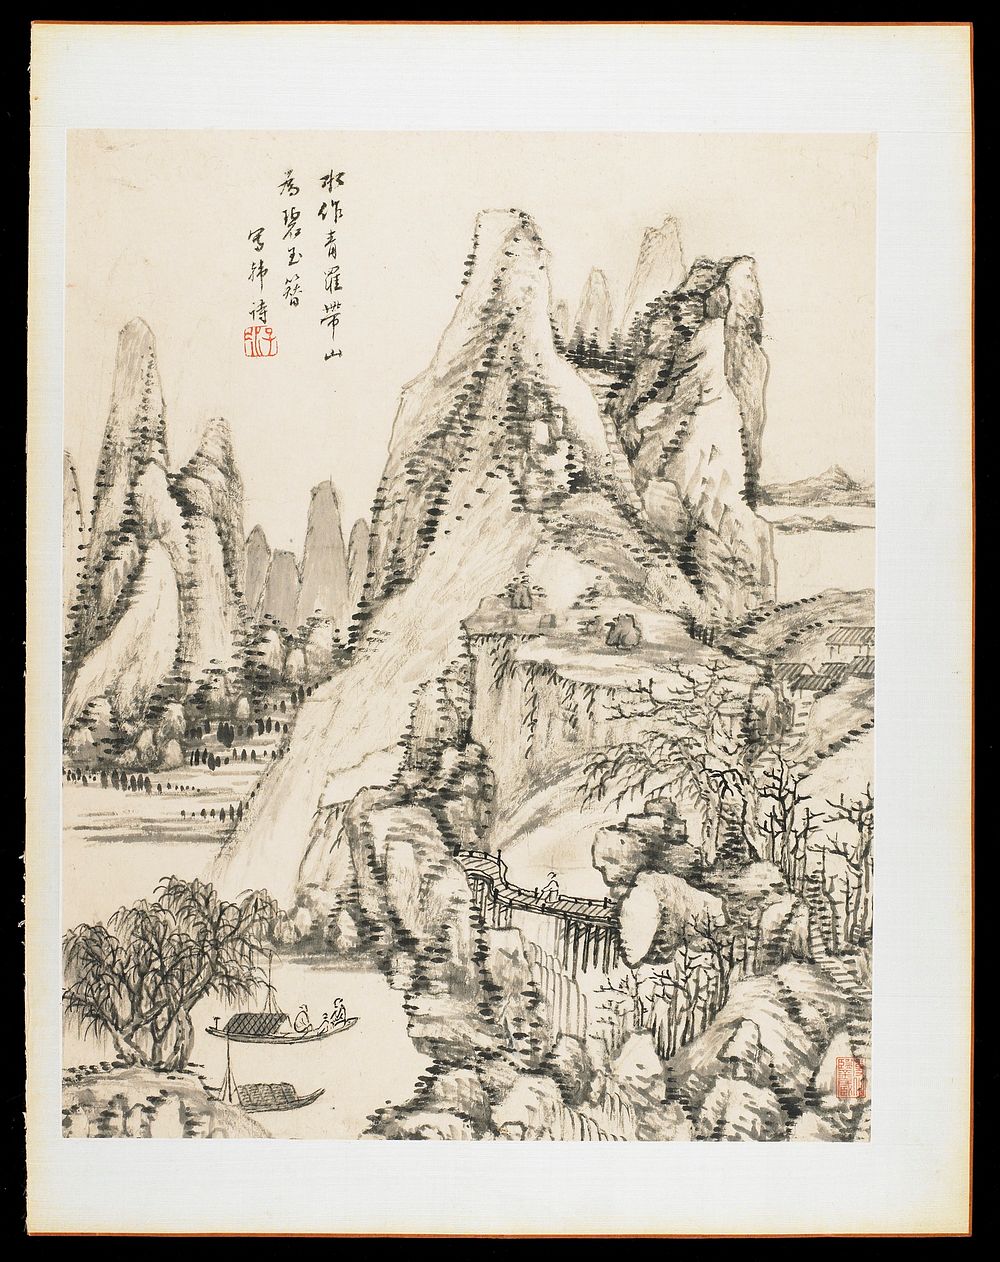 2 boats, LLC, with 3 figures seated in one boat; figure on a walkway near bottom center; rocky, mountainous landscape with…